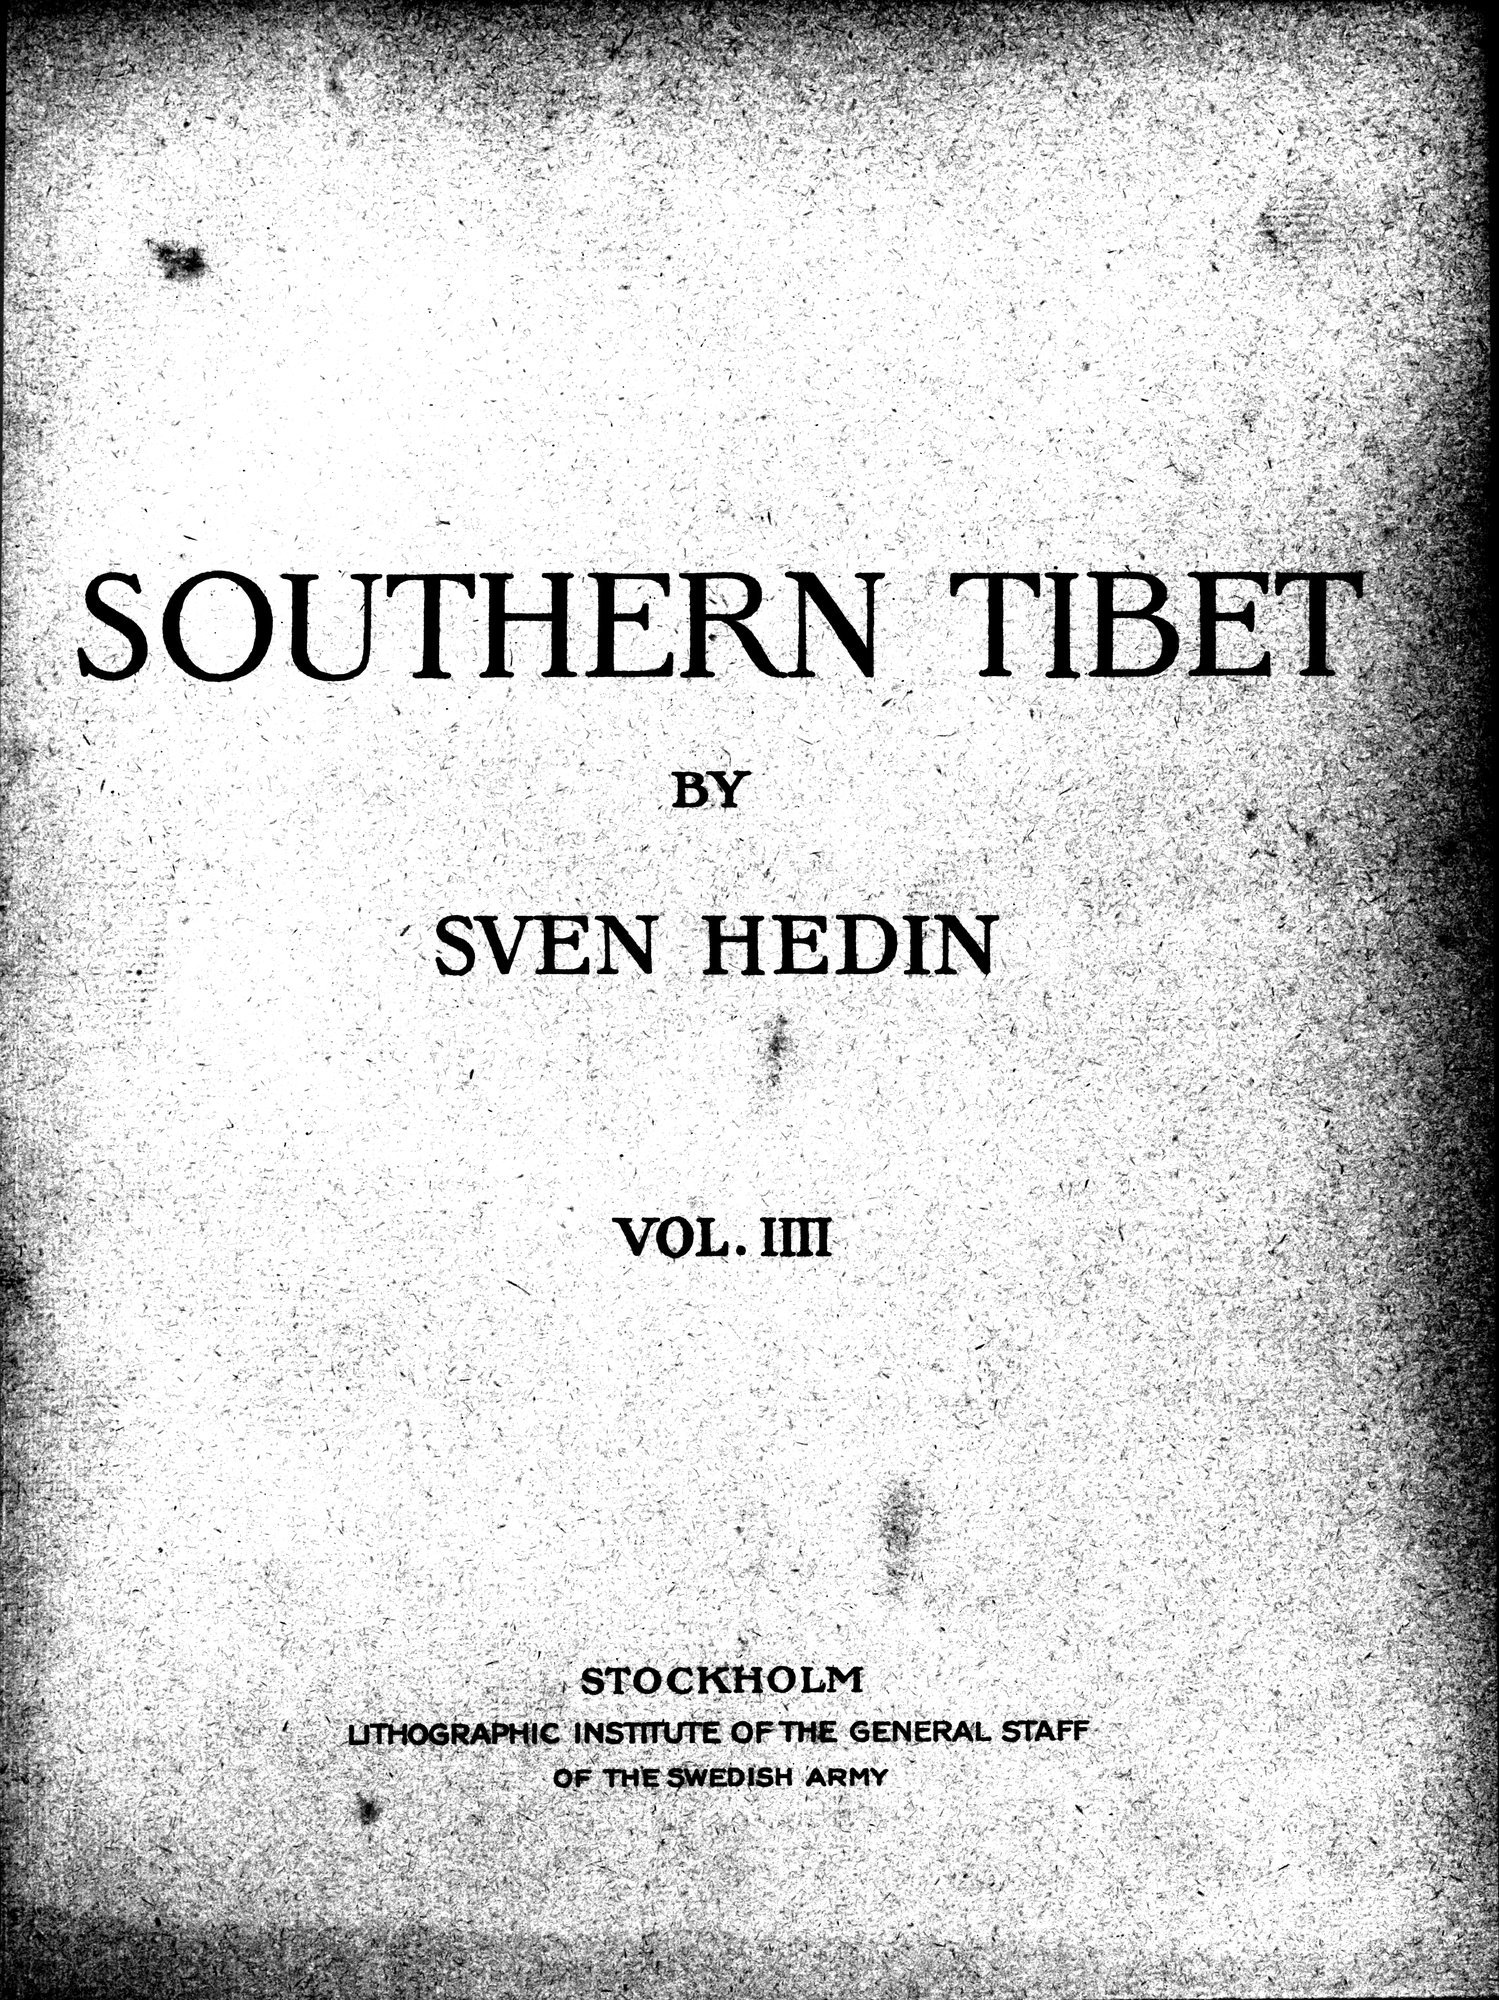 Southern Tibet : vol.4 / Page 7 (Grayscale High Resolution Image)